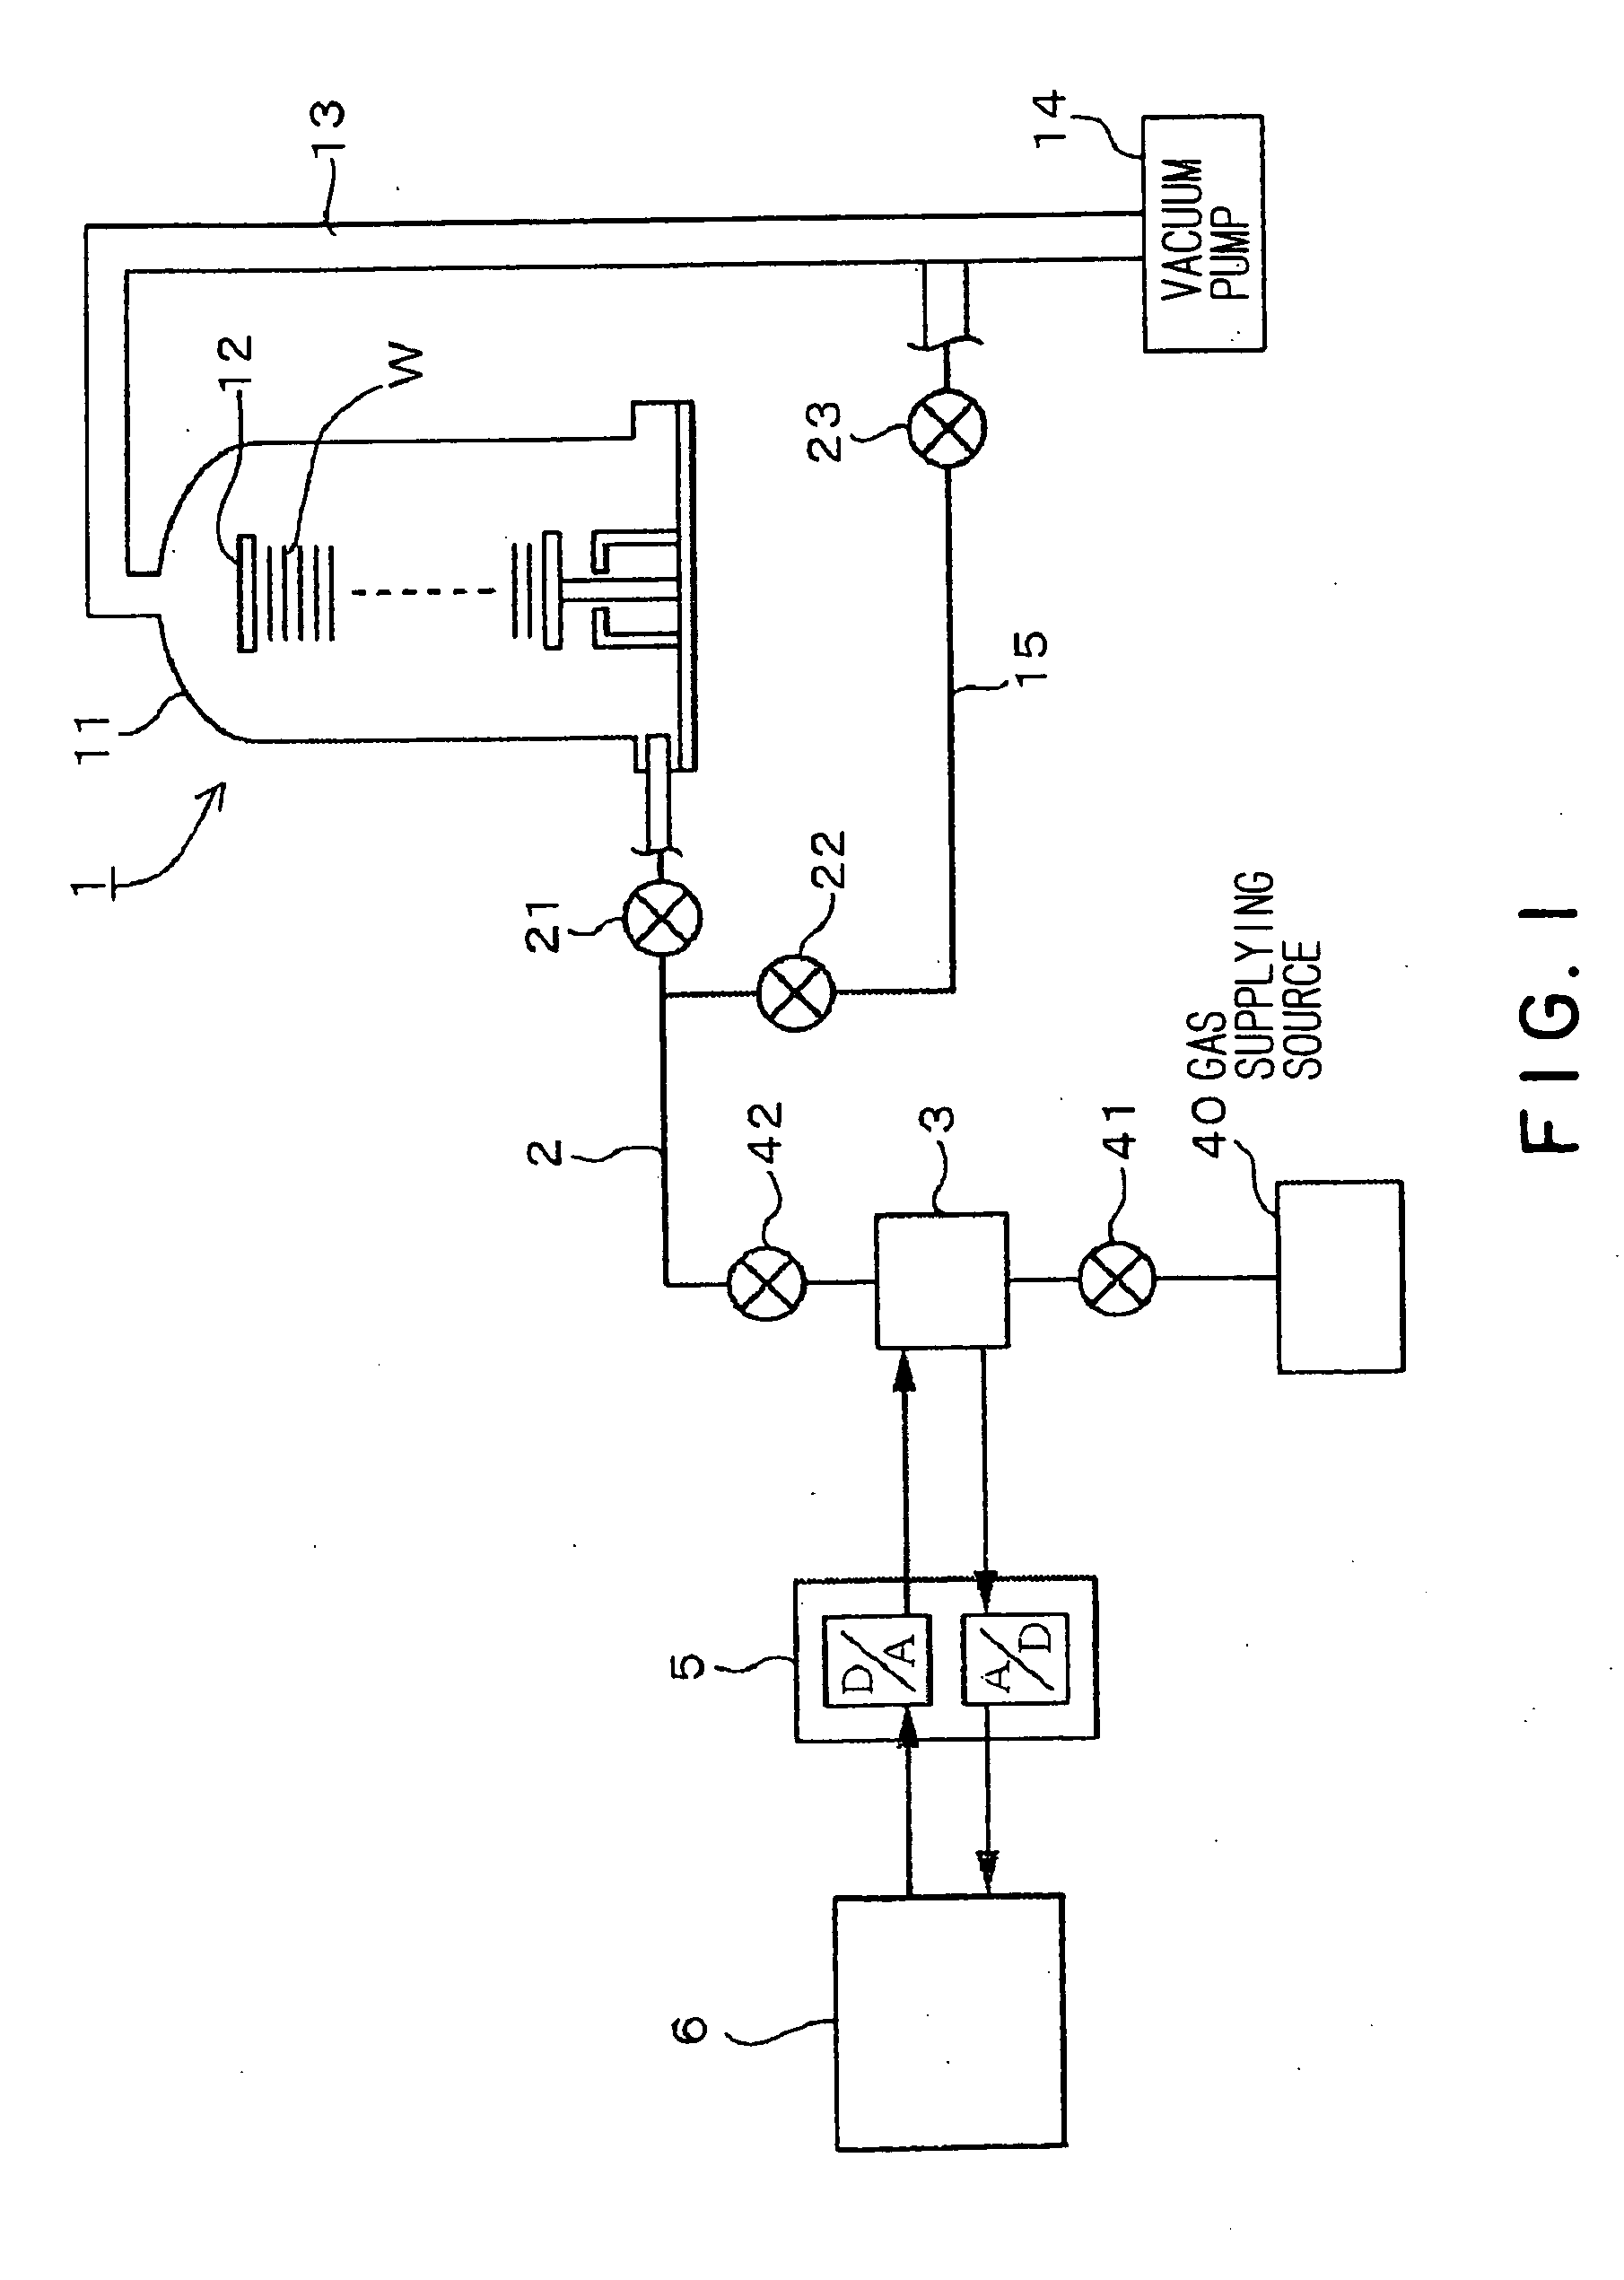 Semiconductor production system and semiconductor production process